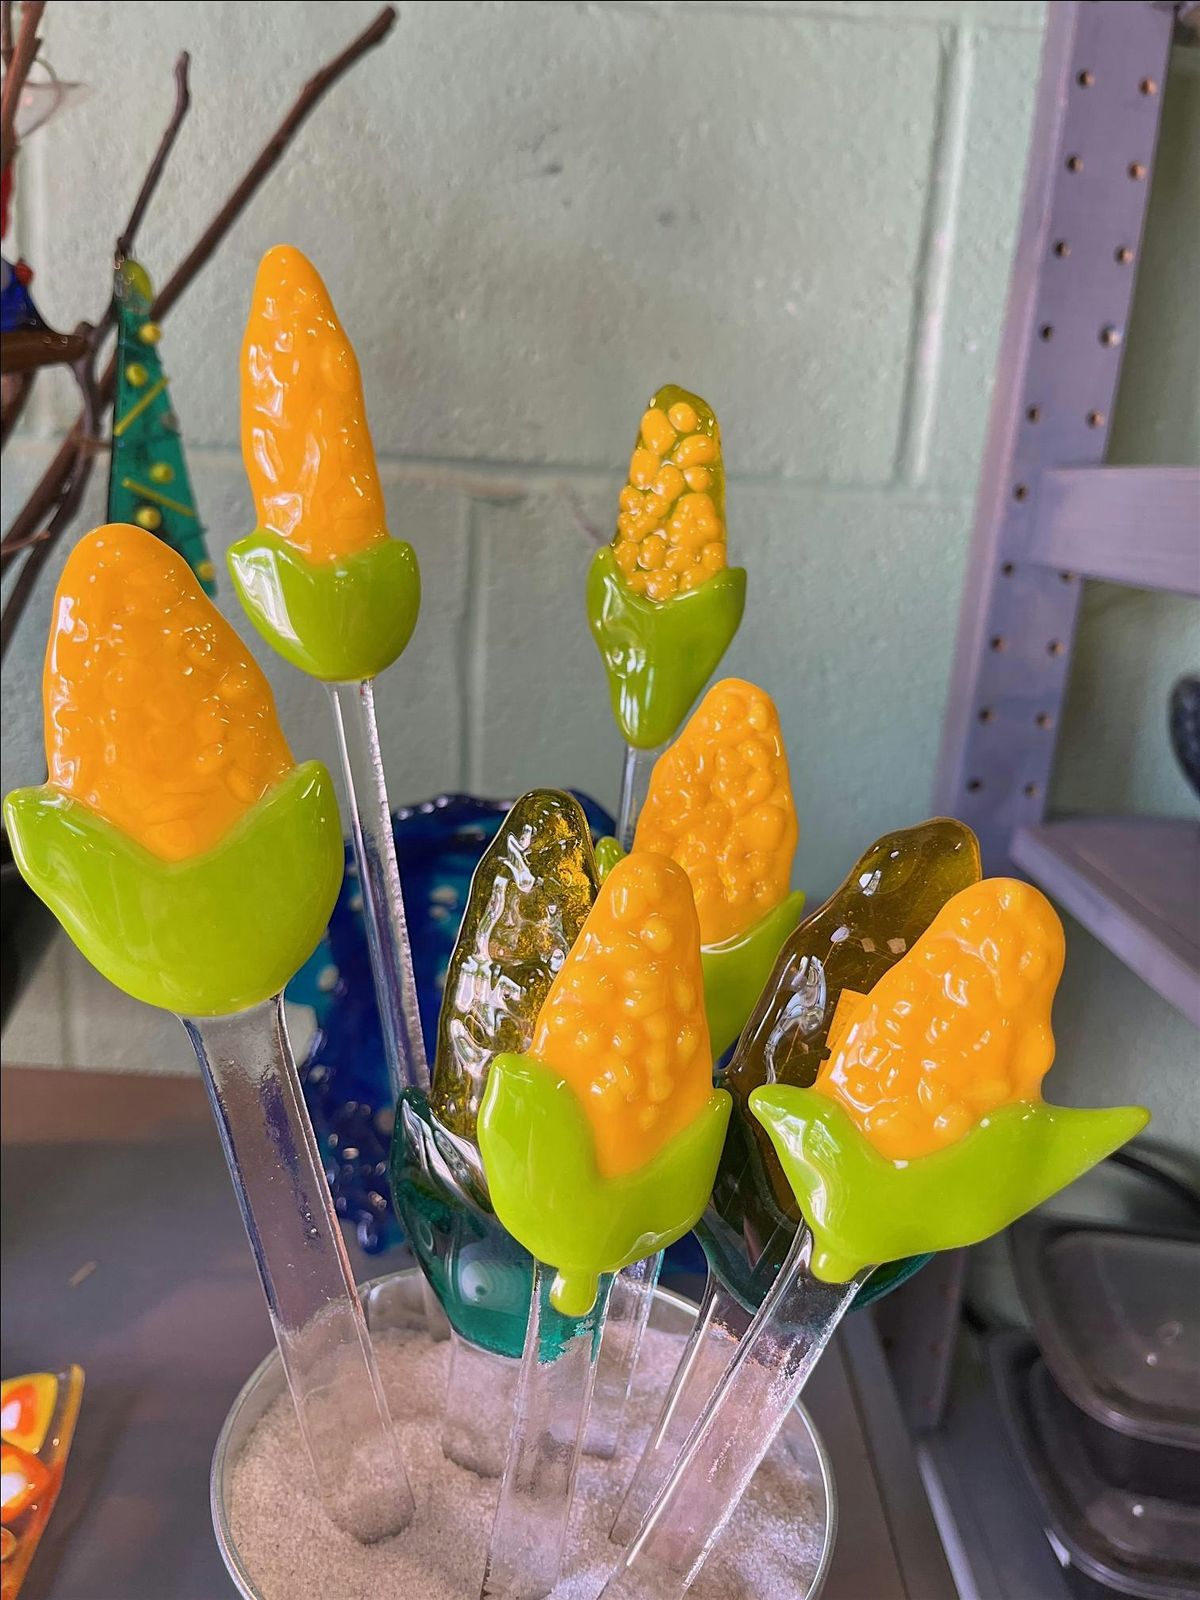 Now that's Corny...Early Afternoon Fun at the Best Fusing Studio in Indy!